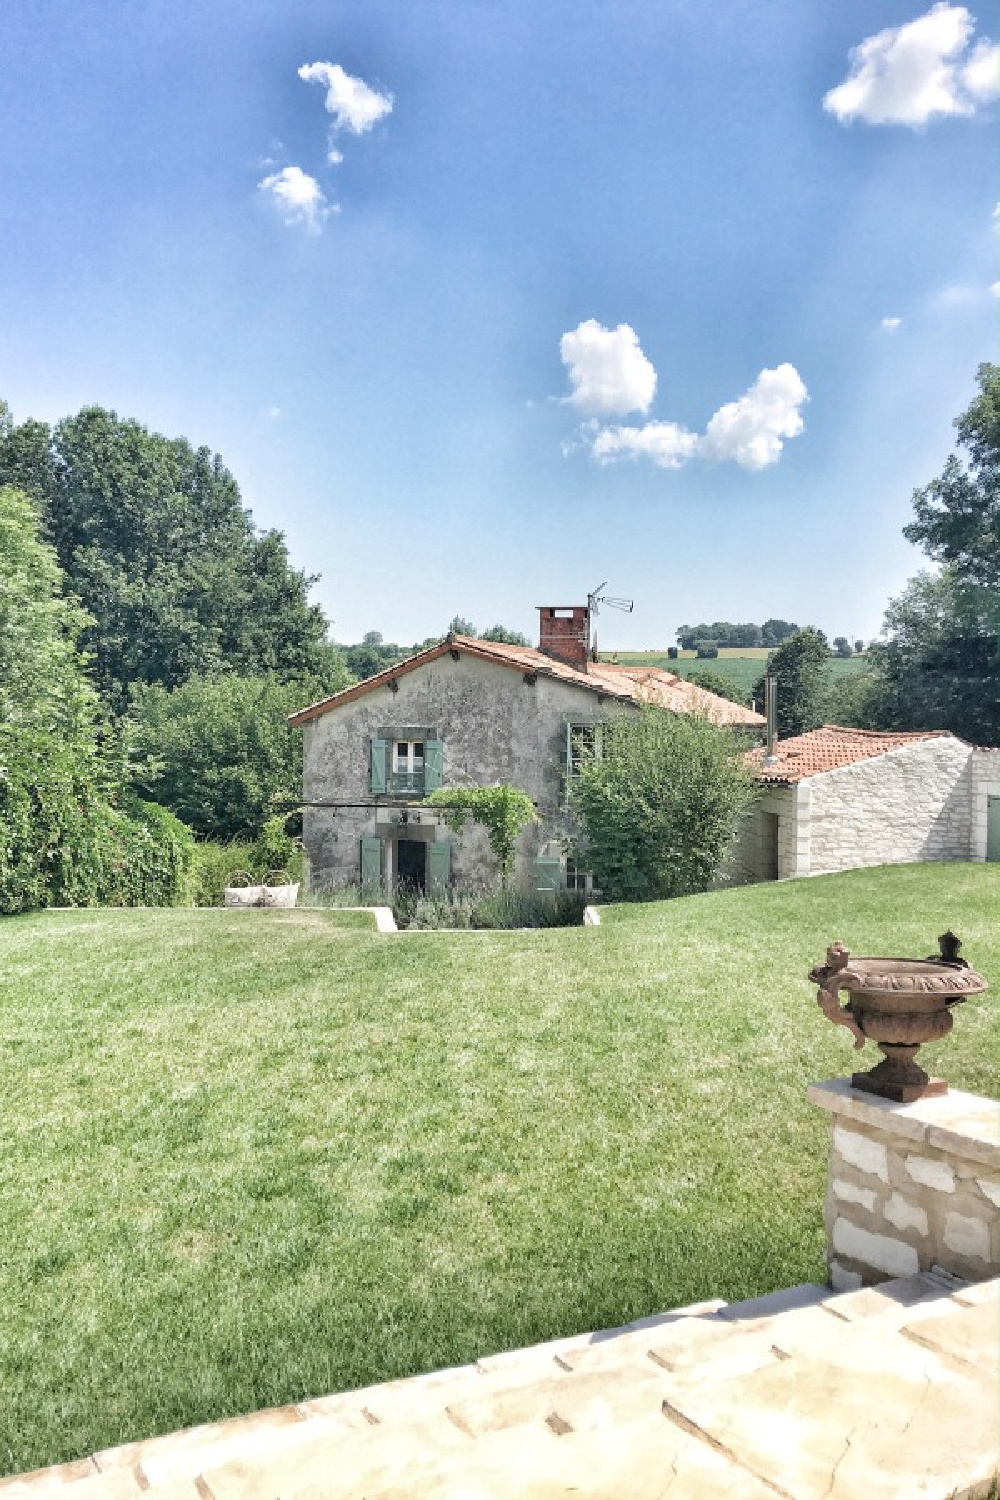 Rustic stone Bordeaux farmhouse with green shutters in French countryside. #vivietmargot #frenchfarmhouse #exterior 